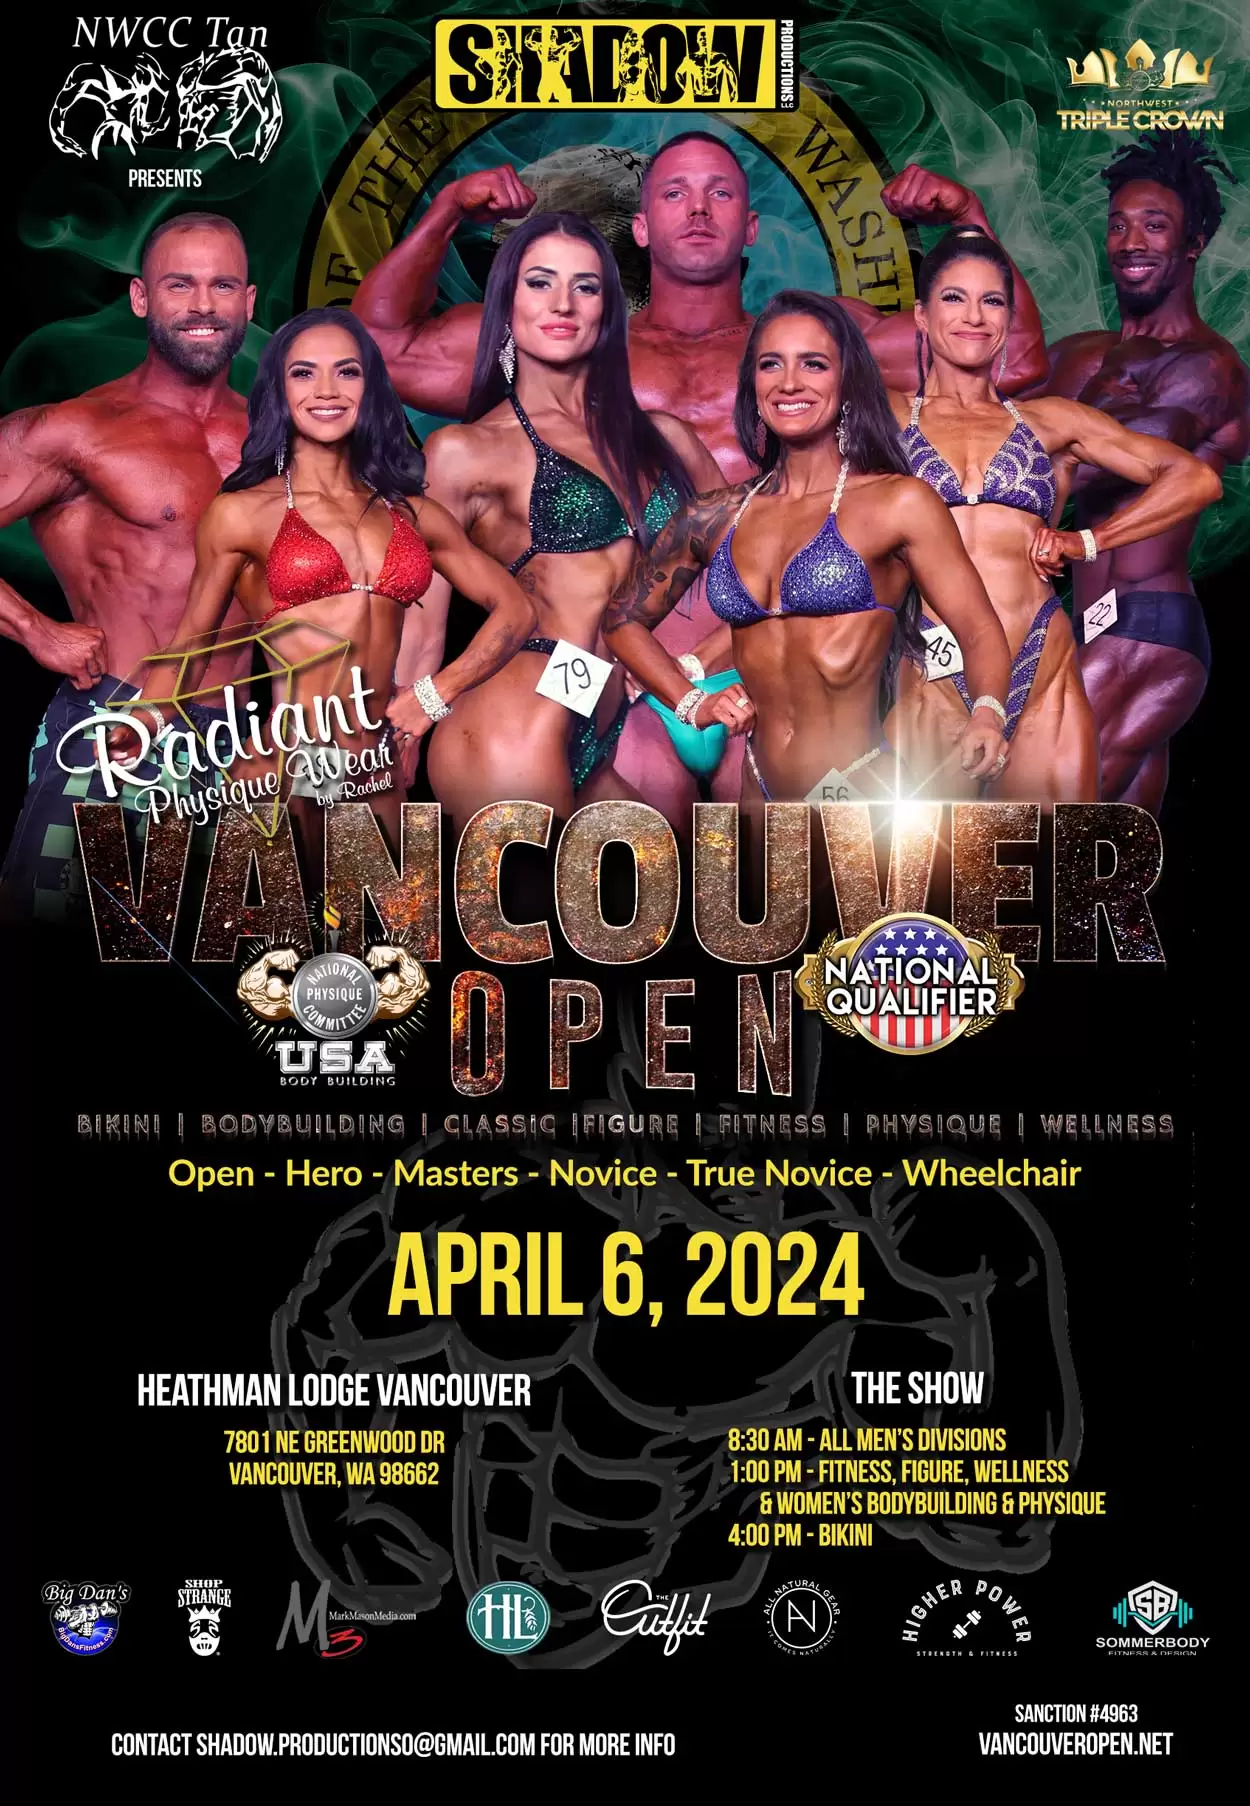 2024 Radiant Physique Wear NPC Vancouver Open presented by NWCC Tan